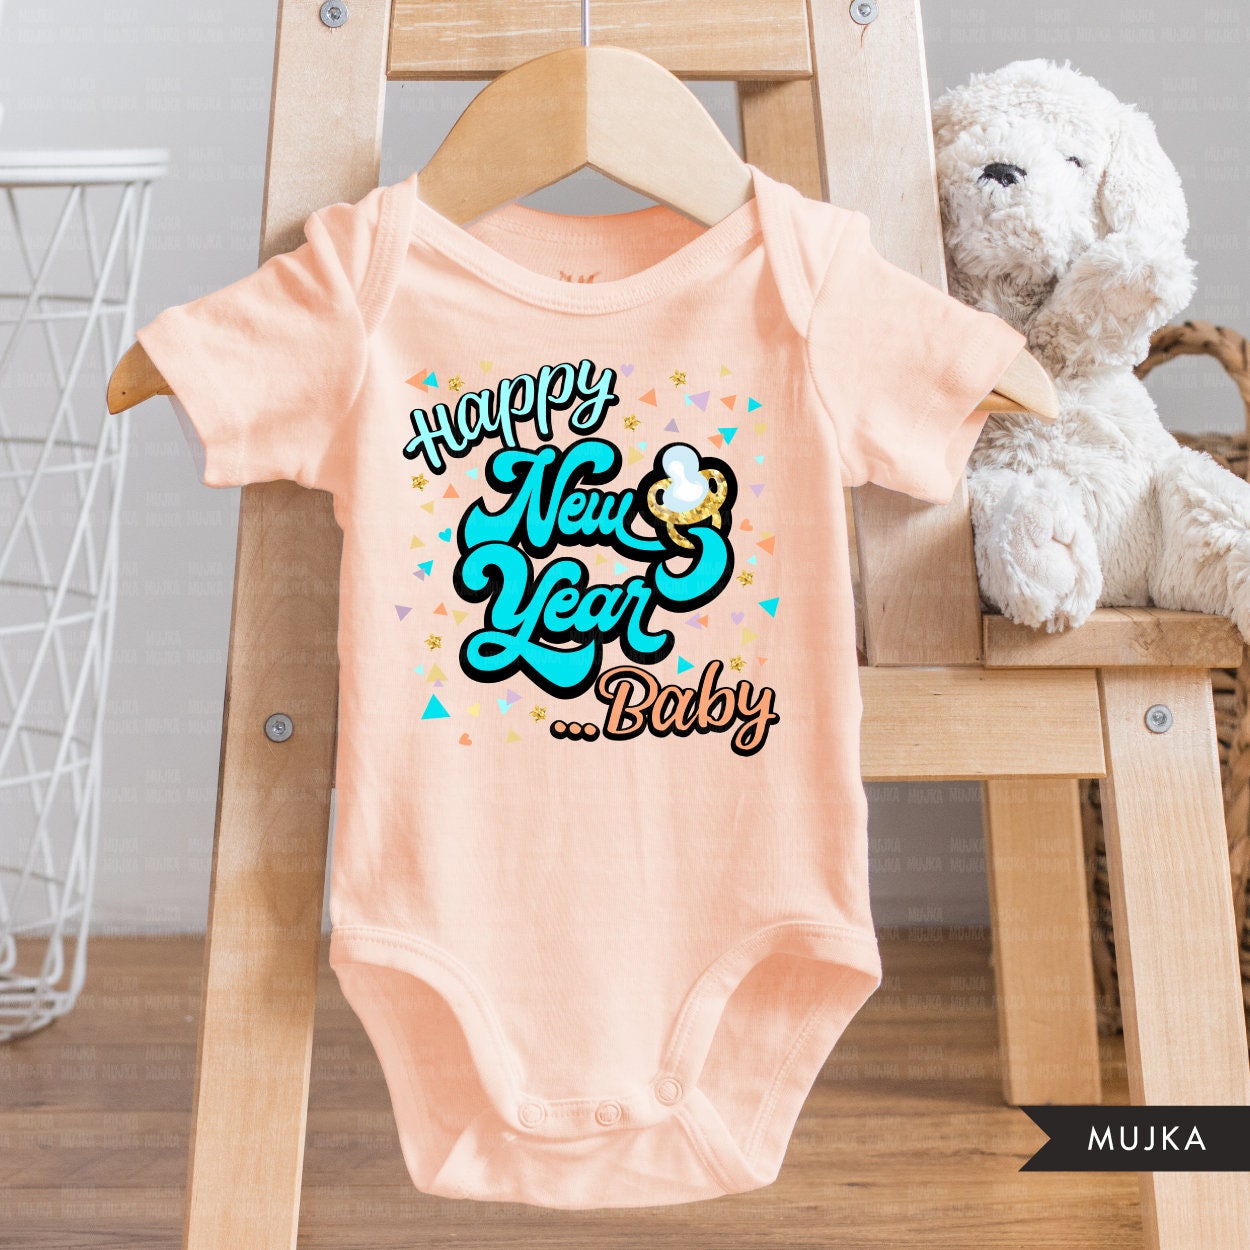 New year baby PNG, new year sublimation designs, new year baby boy shirt, new year png, new year clipart, happy new year designs, 2022 baby